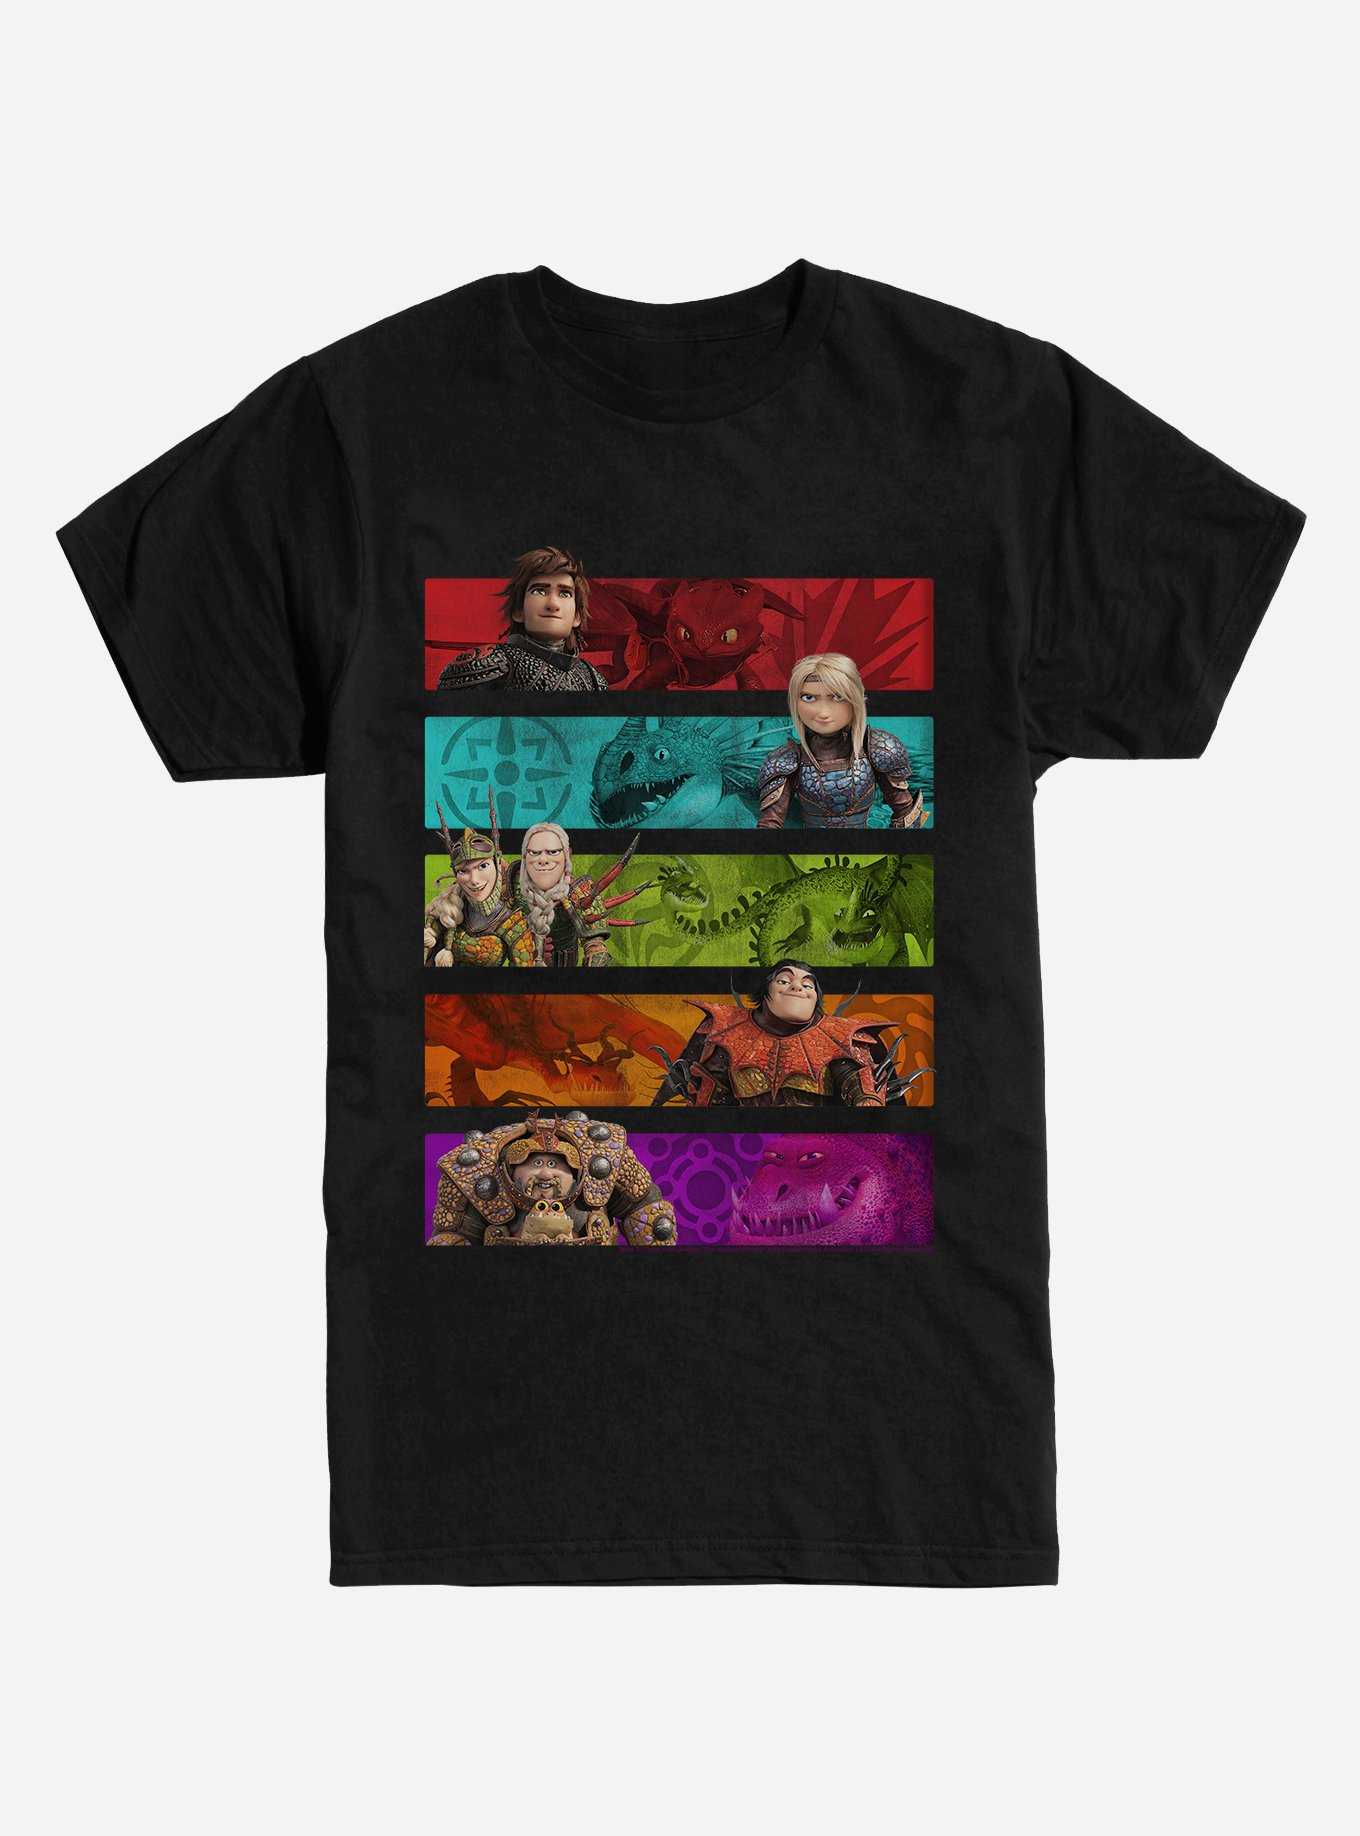 How To Train Your Dragon Character Bars T-Shirt, , hi-res